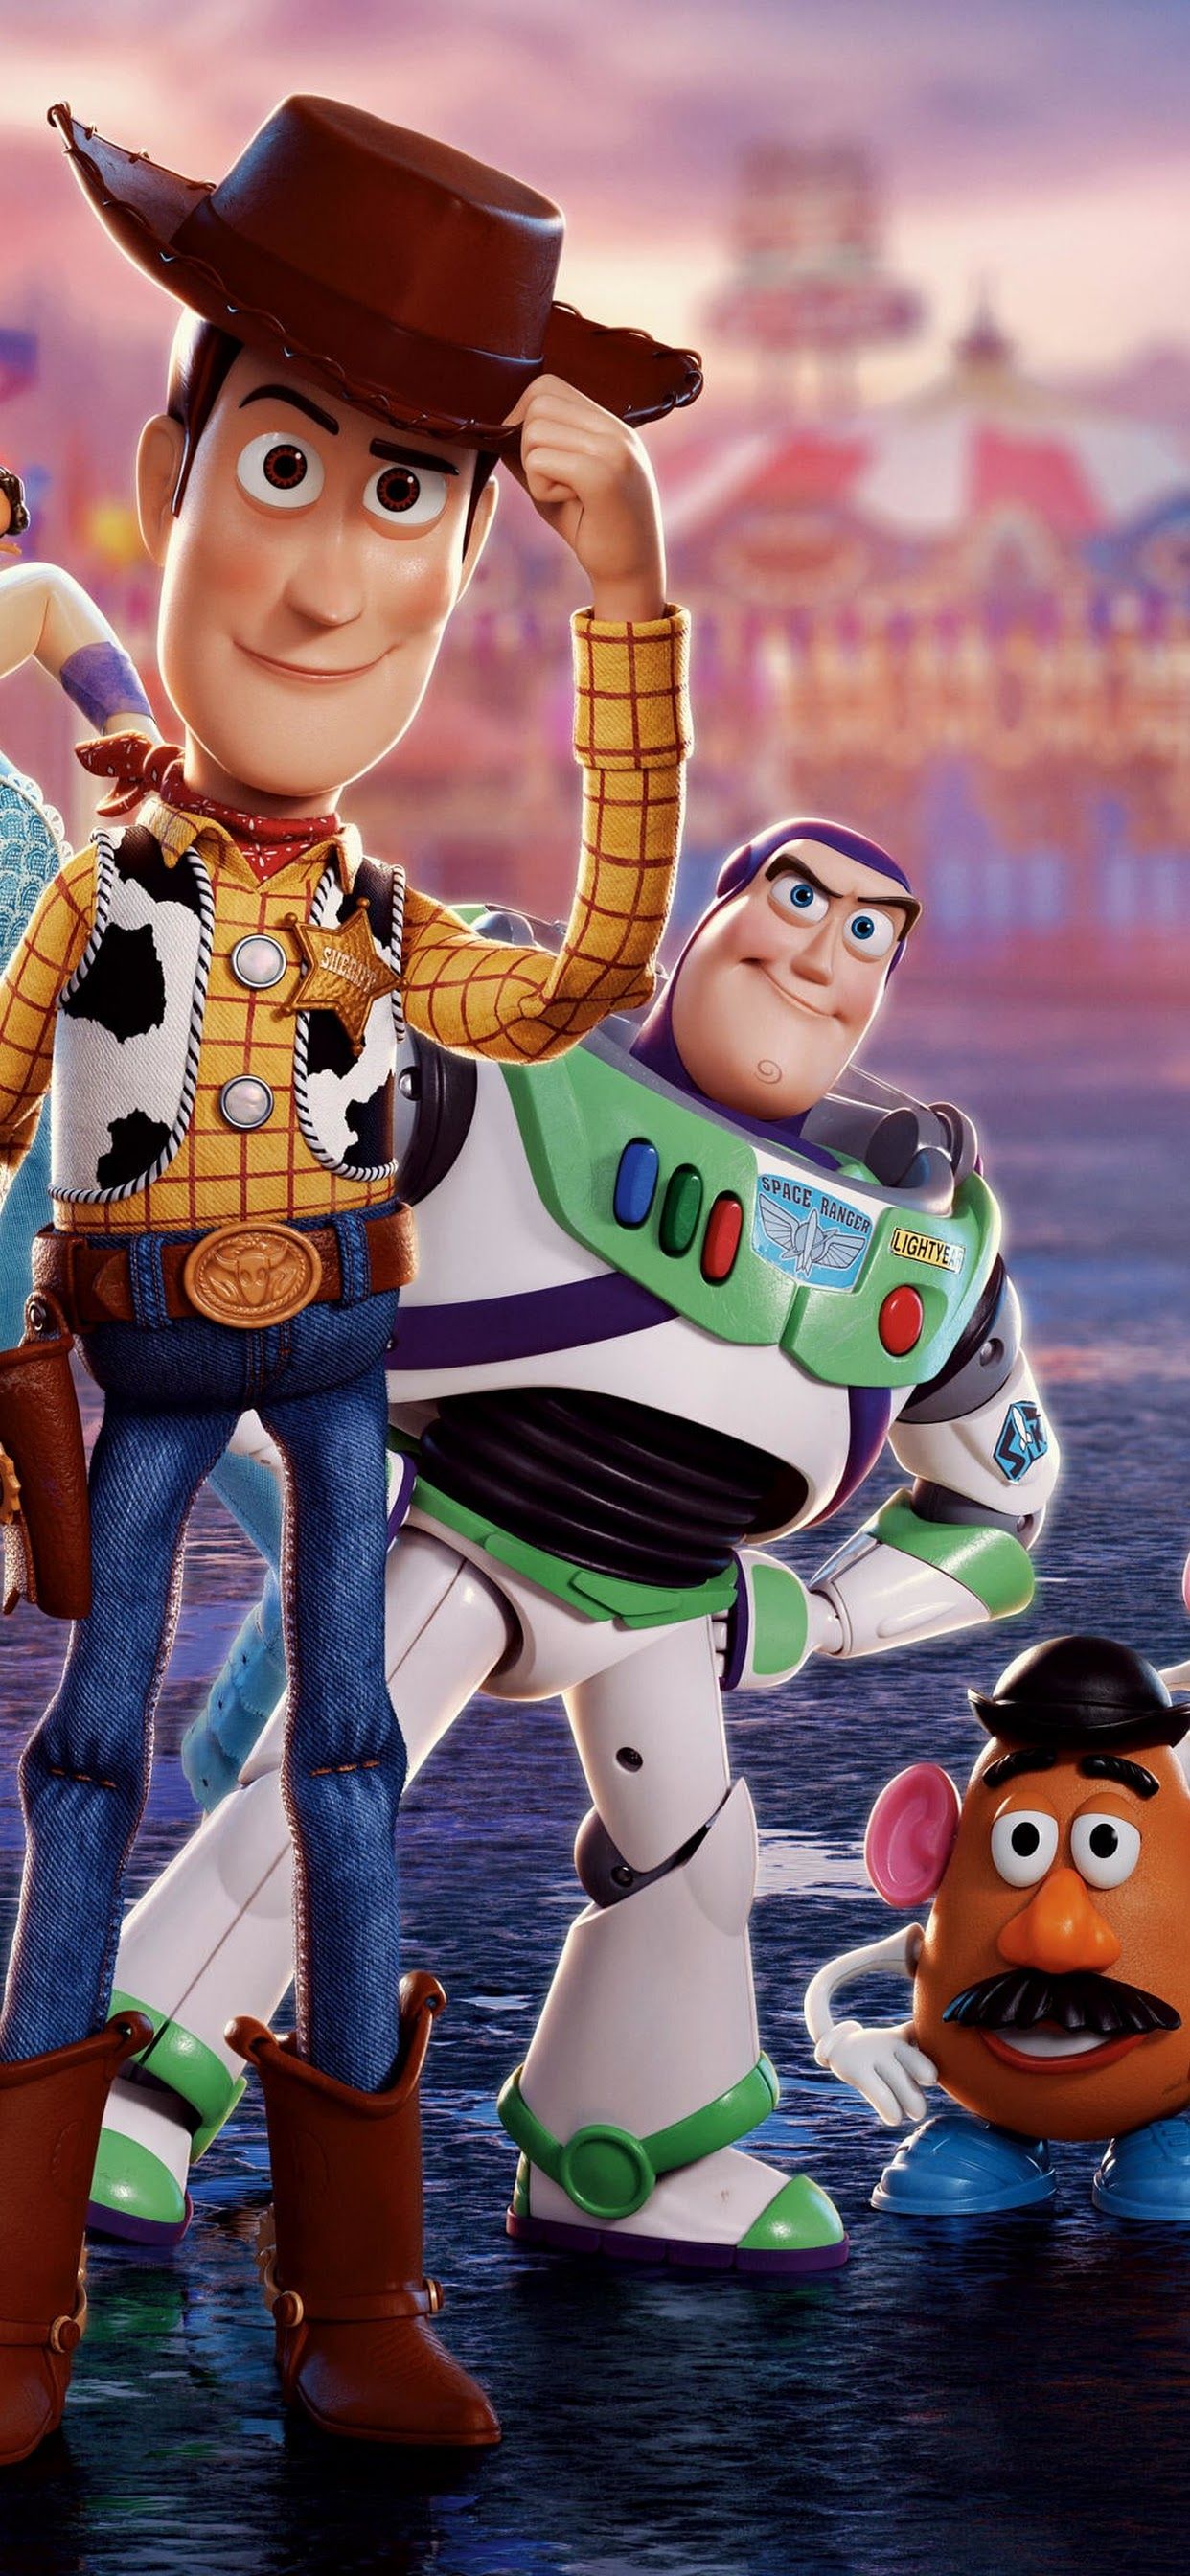 Toy Story 4 Characters 4K Wallpaper